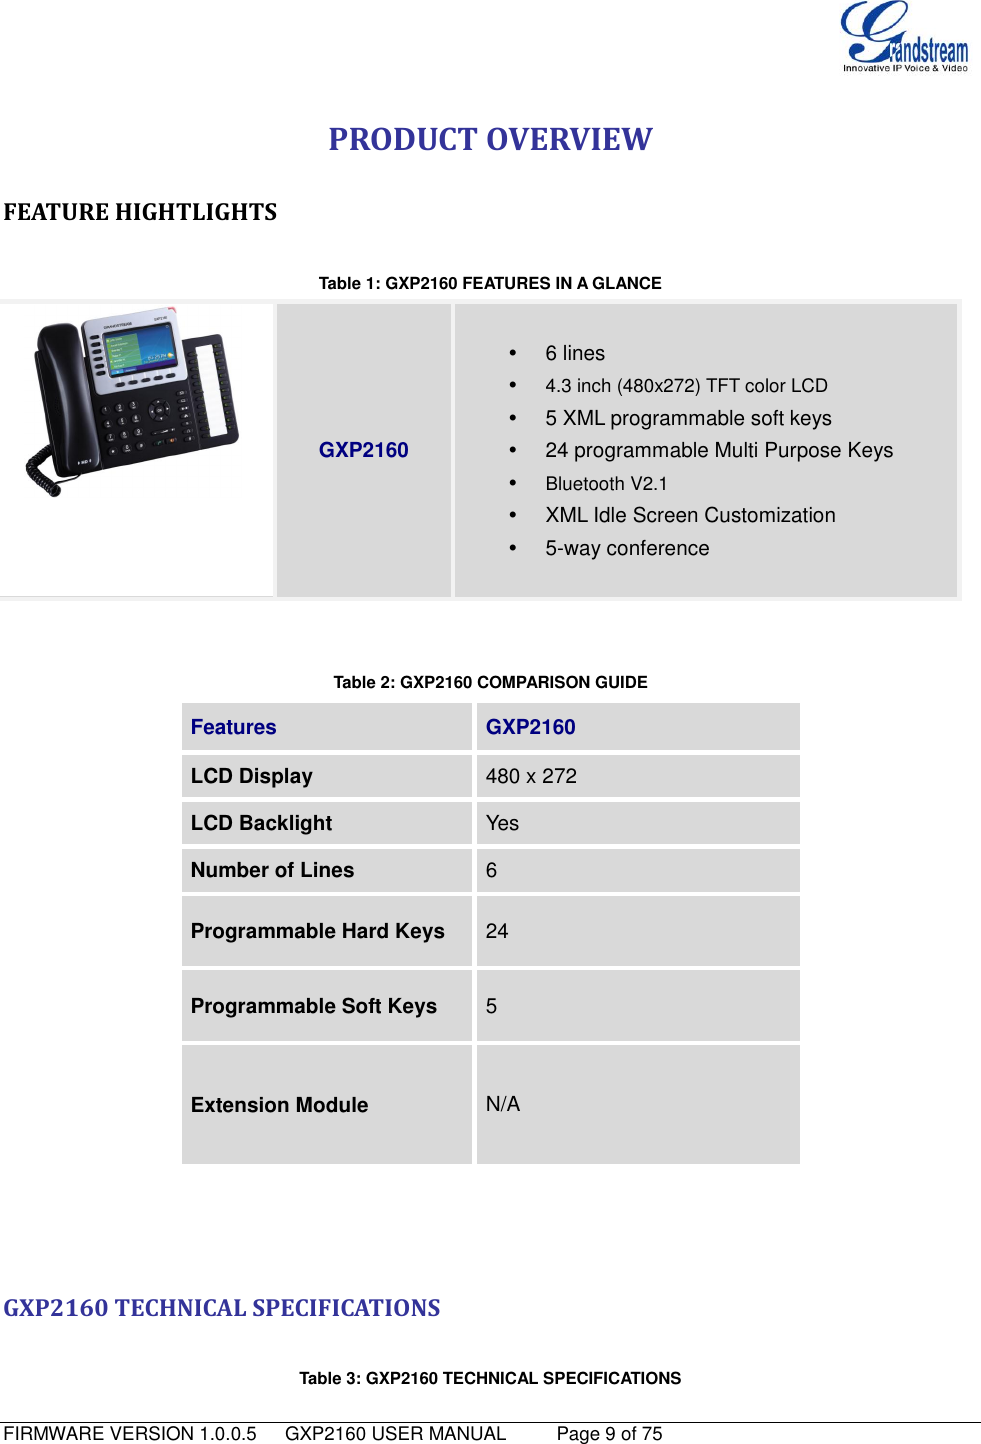   FIRMWARE VERSION 1.0.0.5   GXP2160 USER MANUAL     Page 9 of 75                                   PRODUCT OVERVIEW                               FEATURE HIGHTLIGHTS  Table 1: GXP2160 FEATURES IN A GLANCE  GXP2160    6 lines  4.3 inch (480x272) TFT color LCD   5 XML programmable soft keys  24 programmable Multi Purpose Keys    Bluetooth V2.1   XML Idle Screen Customization   5-way conference    Table 2: GXP2160 COMPARISON GUIDE Features GXP2160 LCD Display 480 x 272 LCD Backlight Yes Number of Lines 6 Programmable Hard Keys 24 Programmable Soft Keys 5 Extension Module N/A    GXP2160 TECHNICAL SPECIFICATIONS  Table 3: GXP2160 TECHNICAL SPECIFICATIONS 